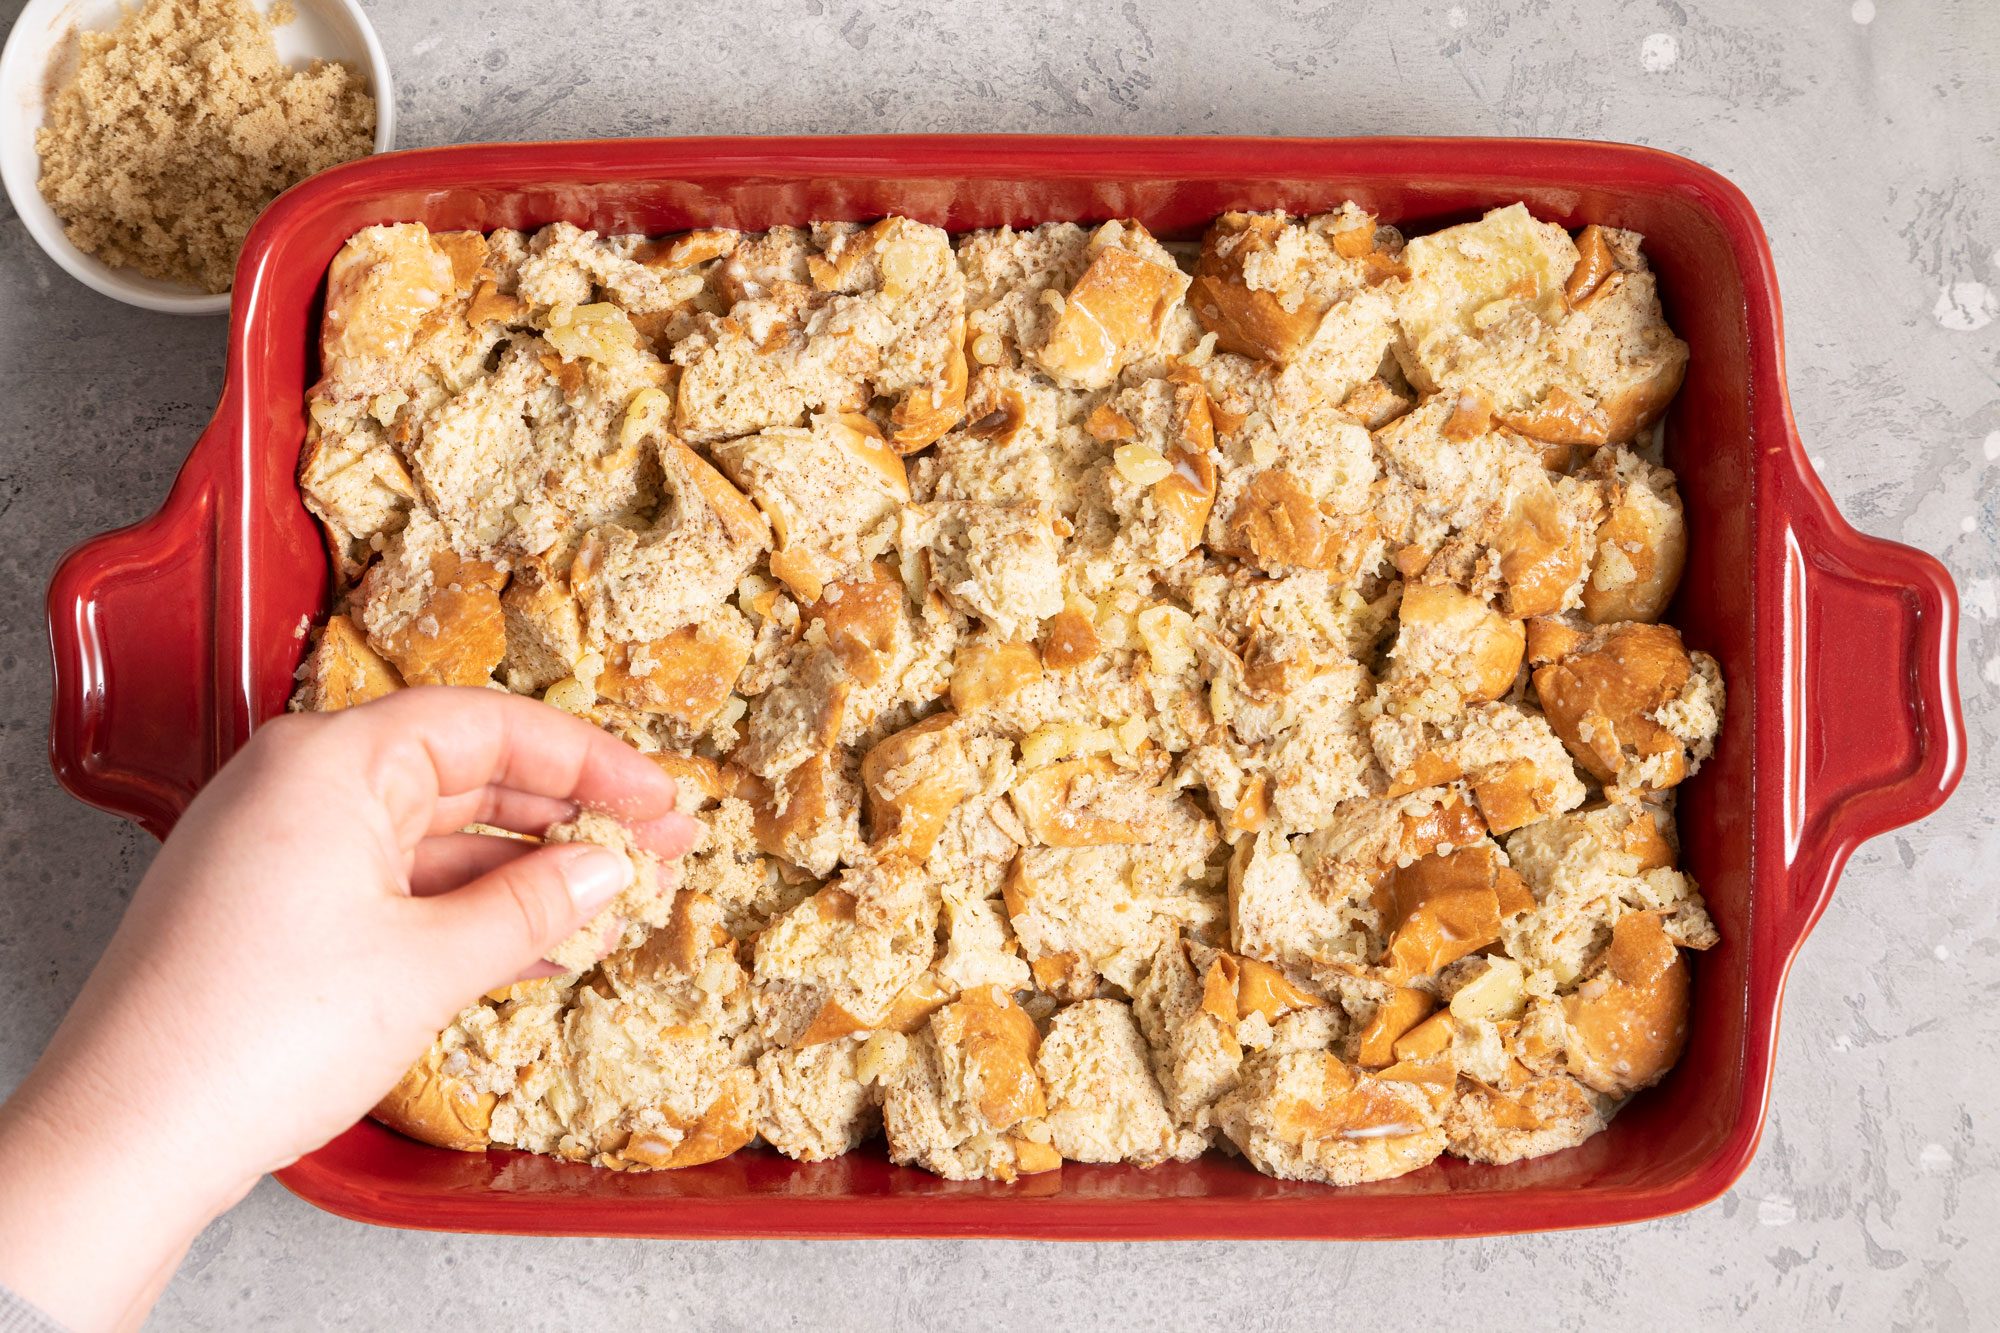 wet bread cubes in a large red baking dish